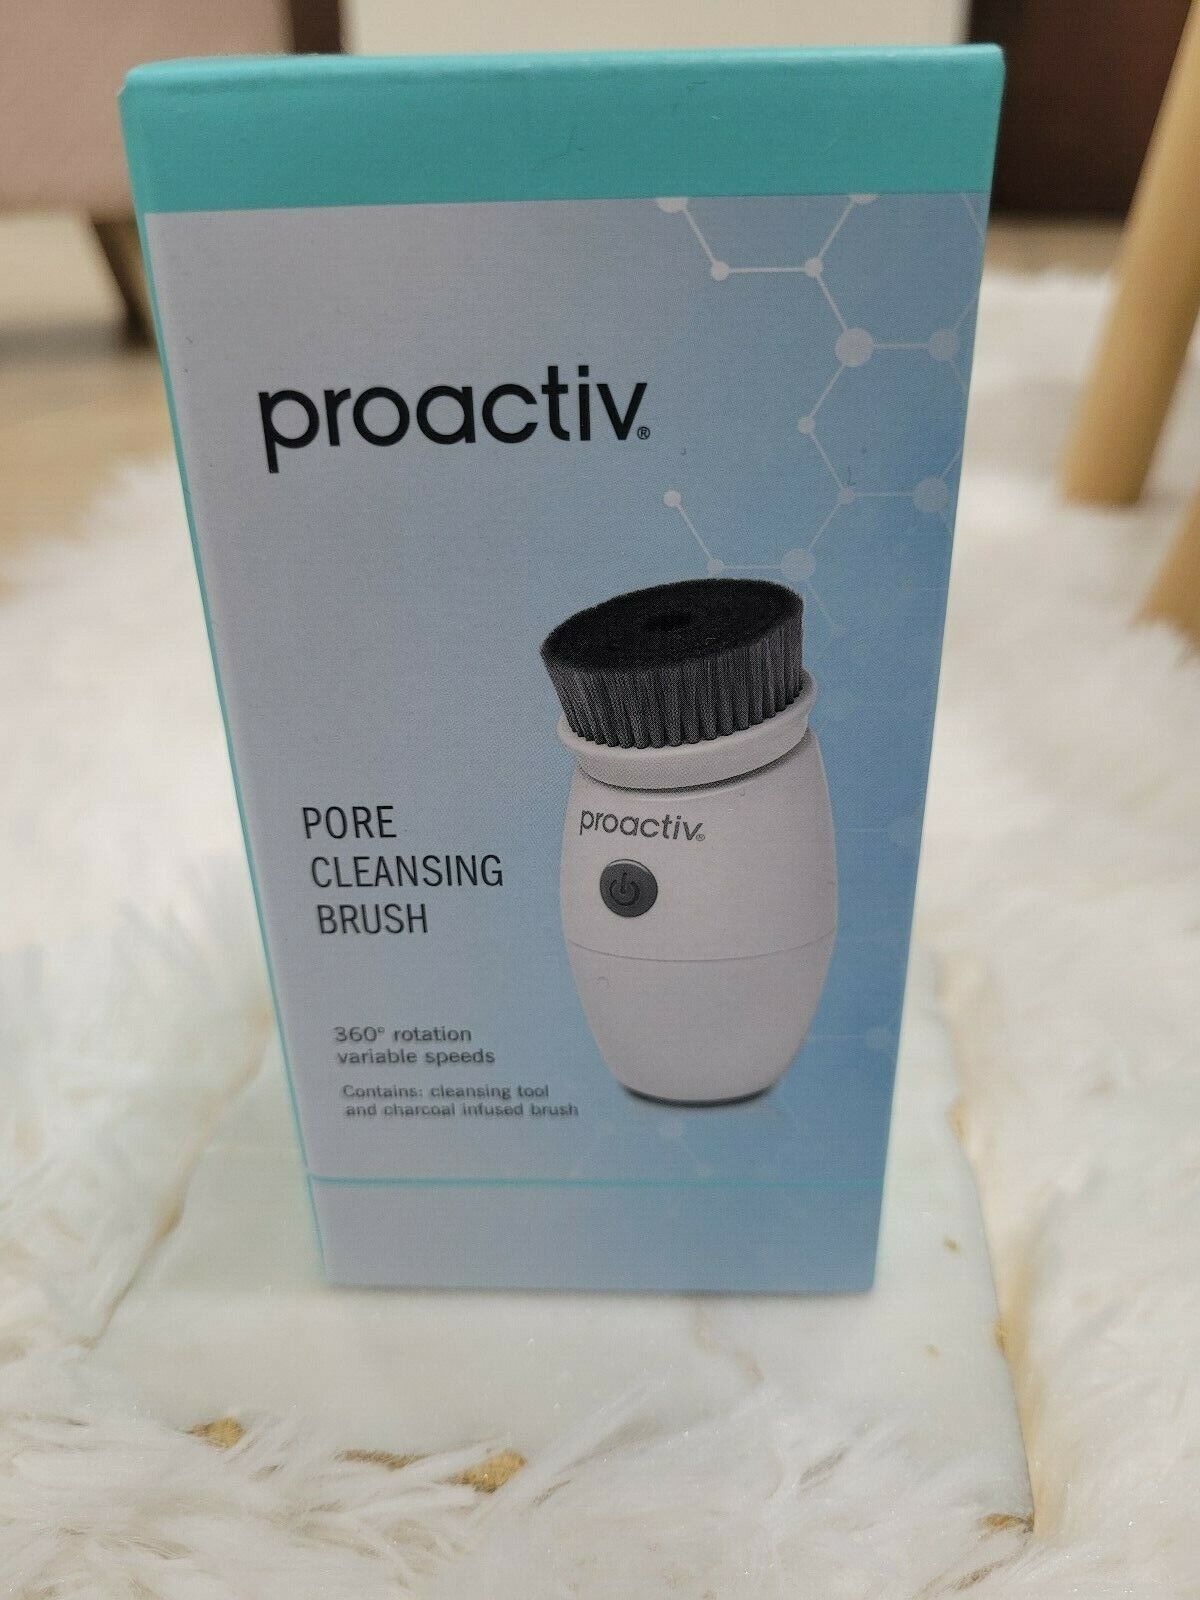 Proactiv pore cleansing brush 360 rotation variable speeds. FREE SHIPPING.